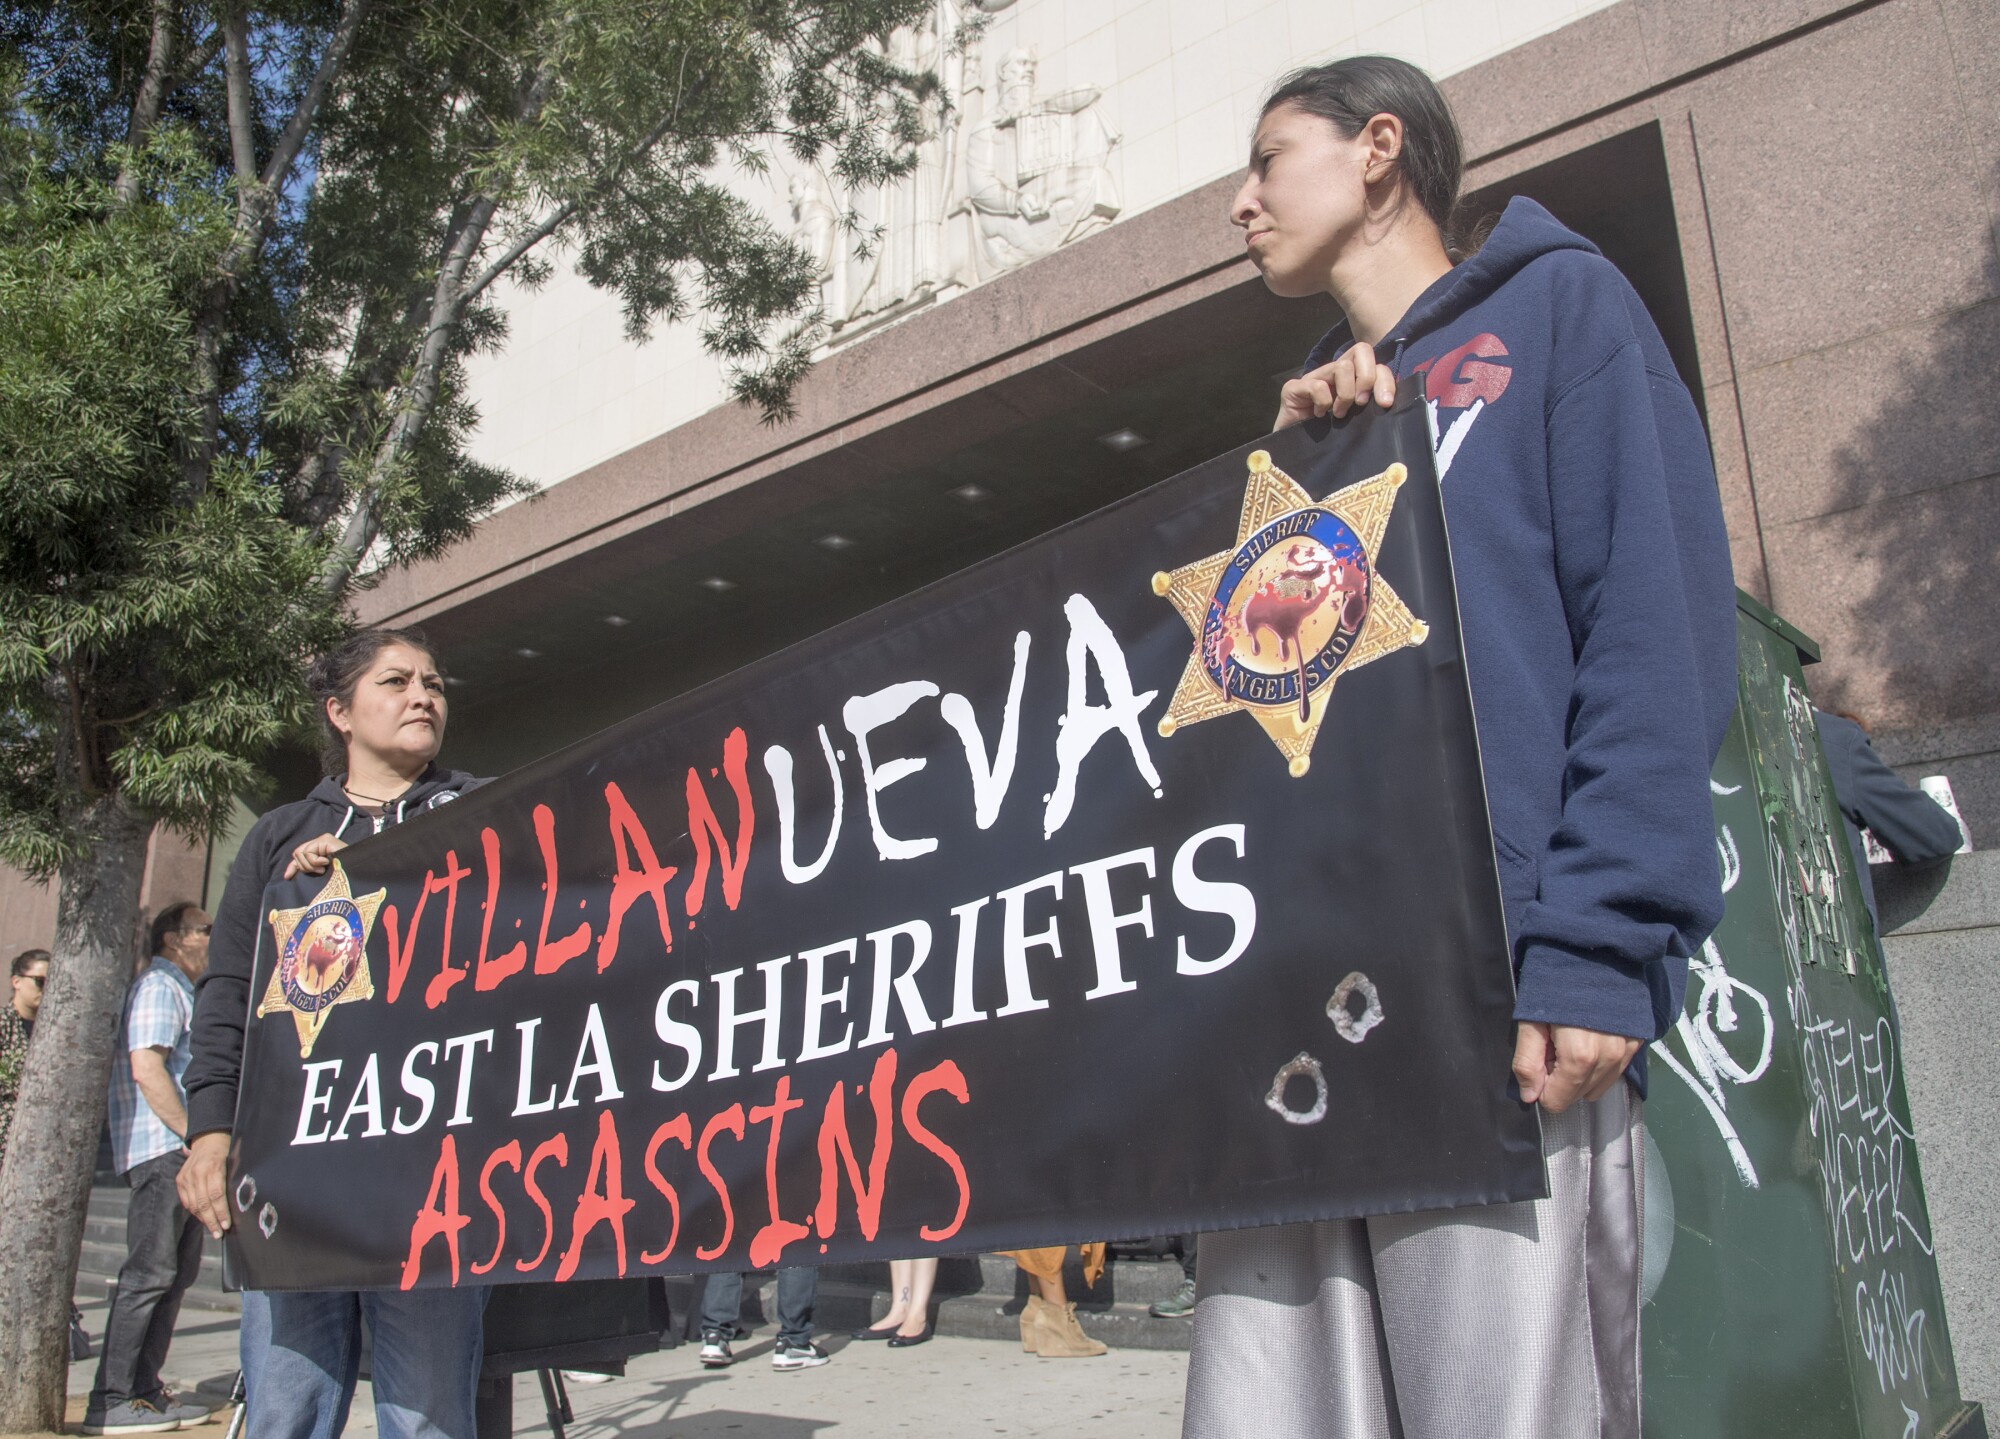 Valerie Vargas and Stephanie Luna hold a sign with the words "Villanueva East LA Sheriffs Assassins" on it.